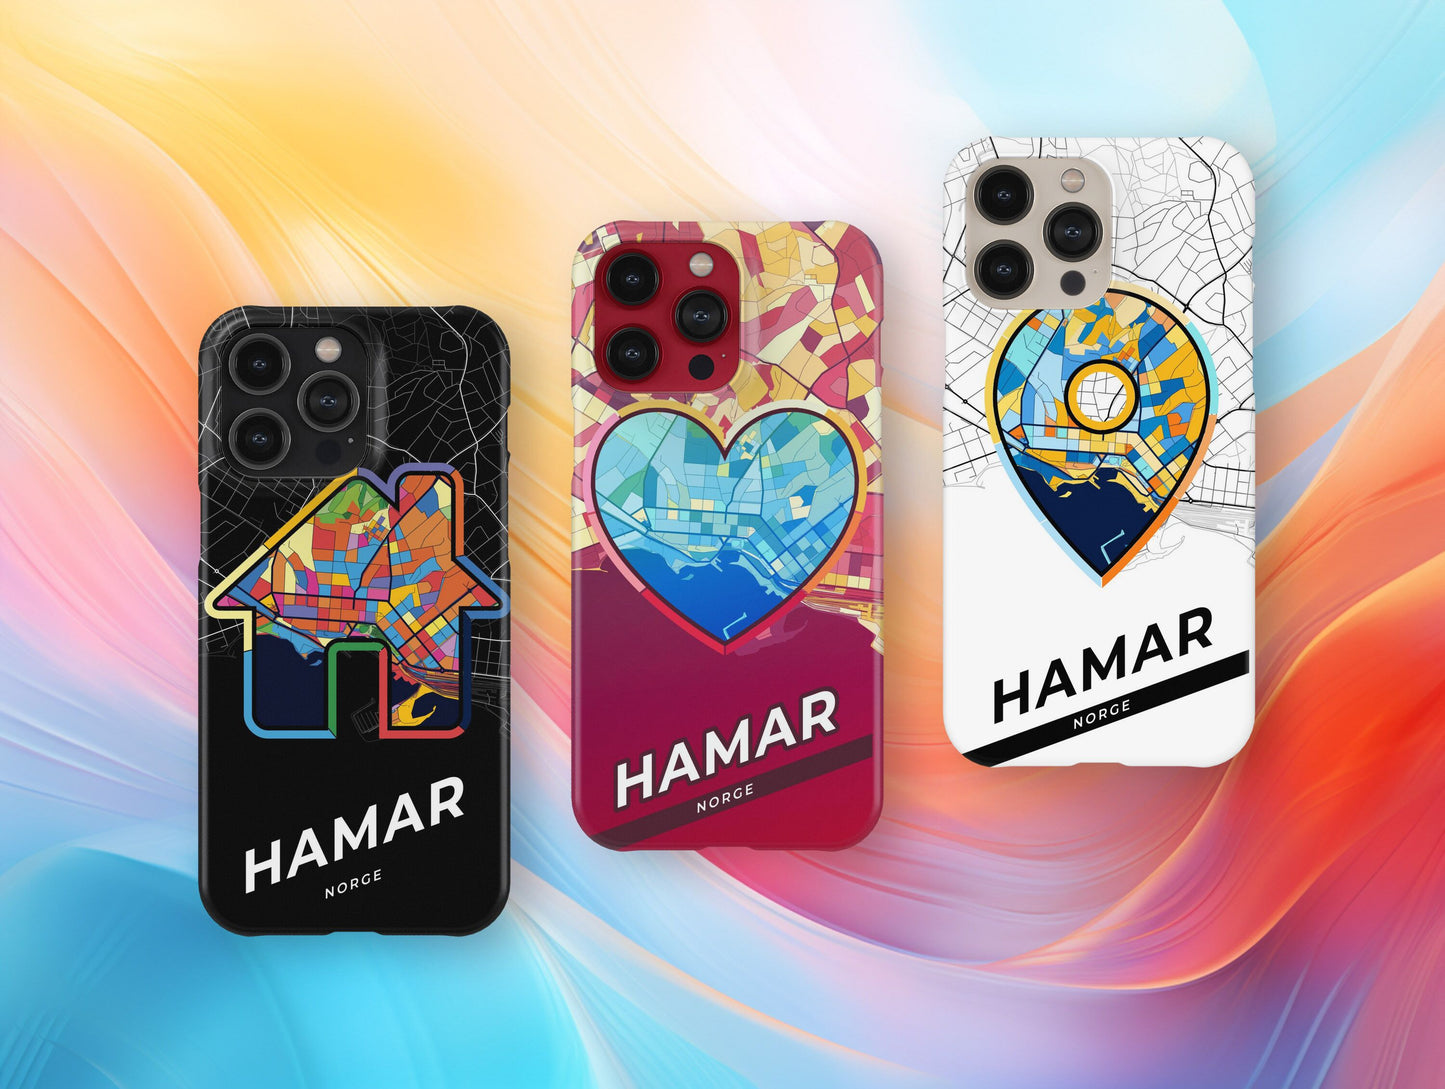 Hamar Norway slim phone case with colorful icon. Birthday, wedding or housewarming gift. Couple match cases.